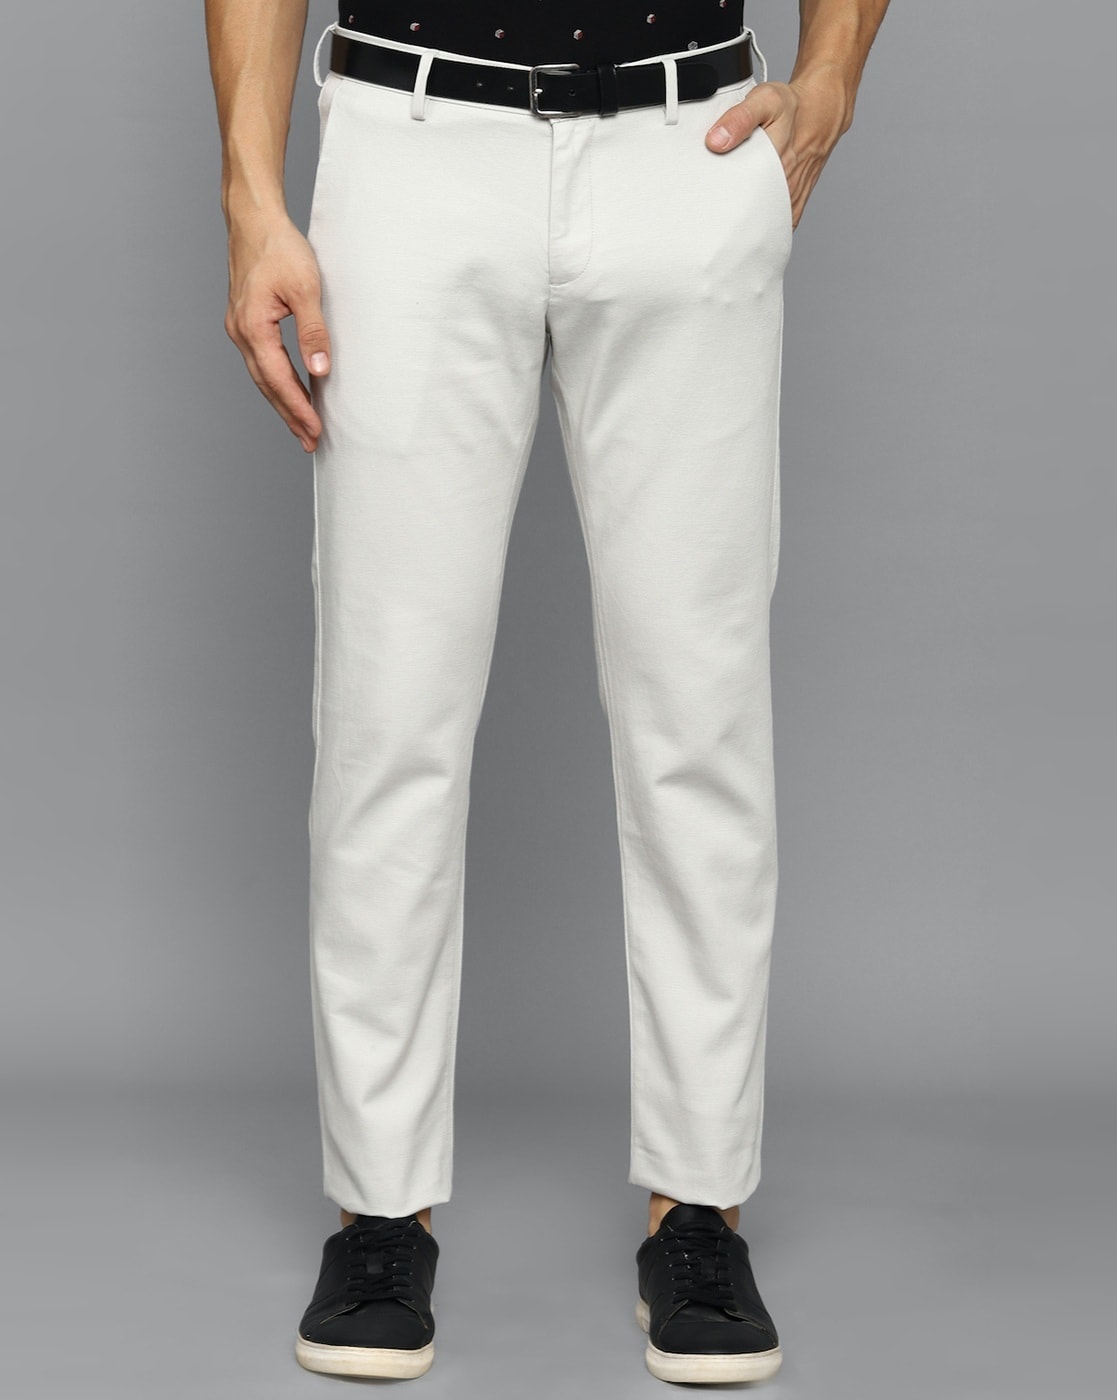 Koton Trousers and Pants  Buy Koton Mid Waist Off White Trousers Online   Nykaa Fashion